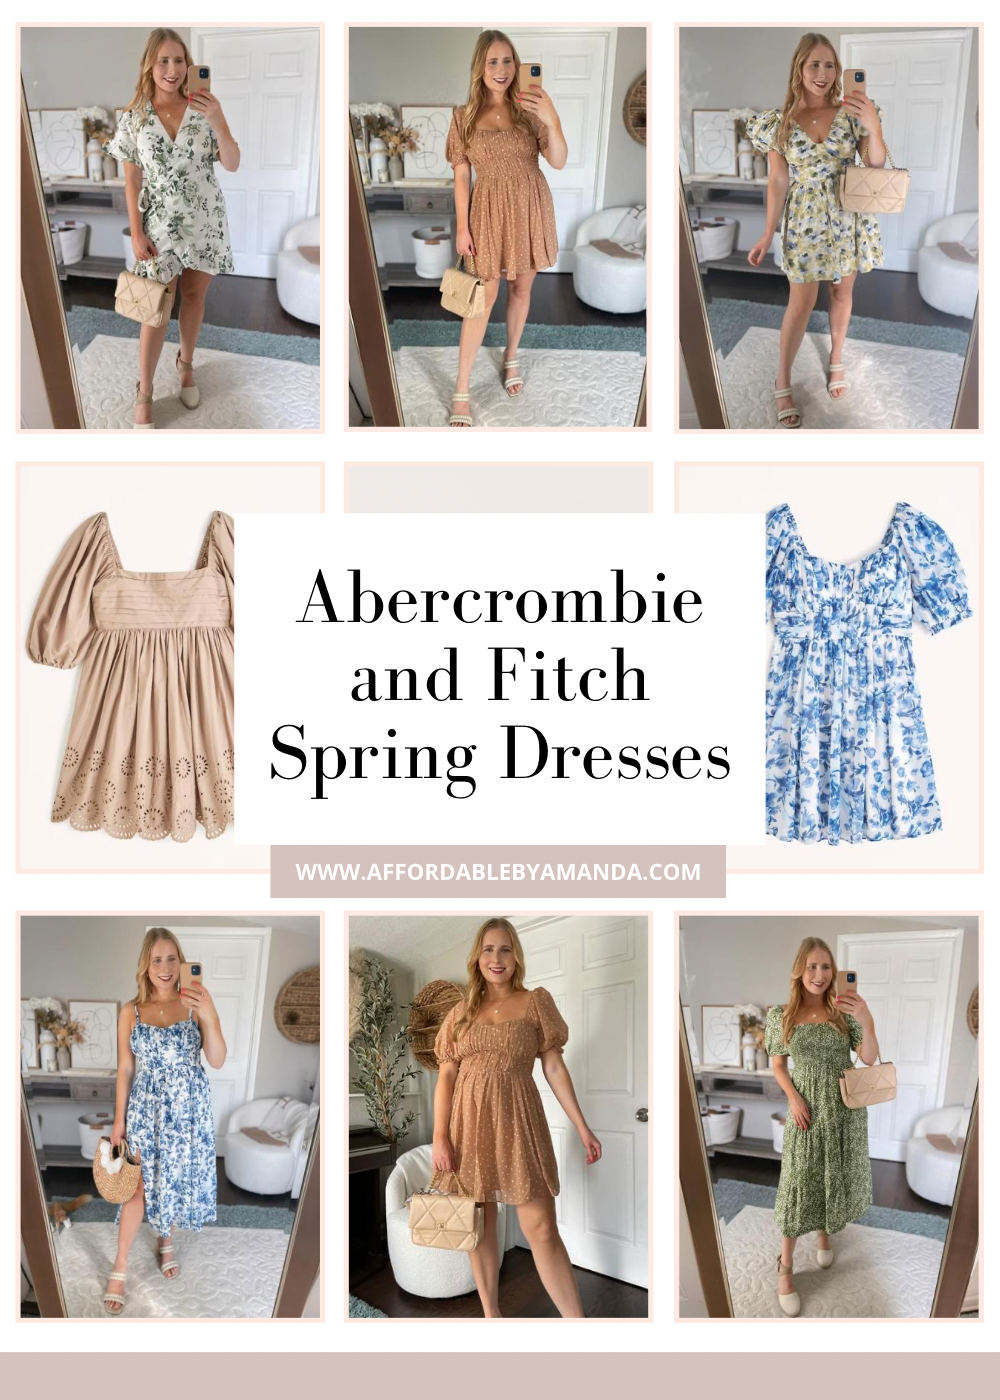 Abercrombie & Fitch Archives - Affordable by Amanda